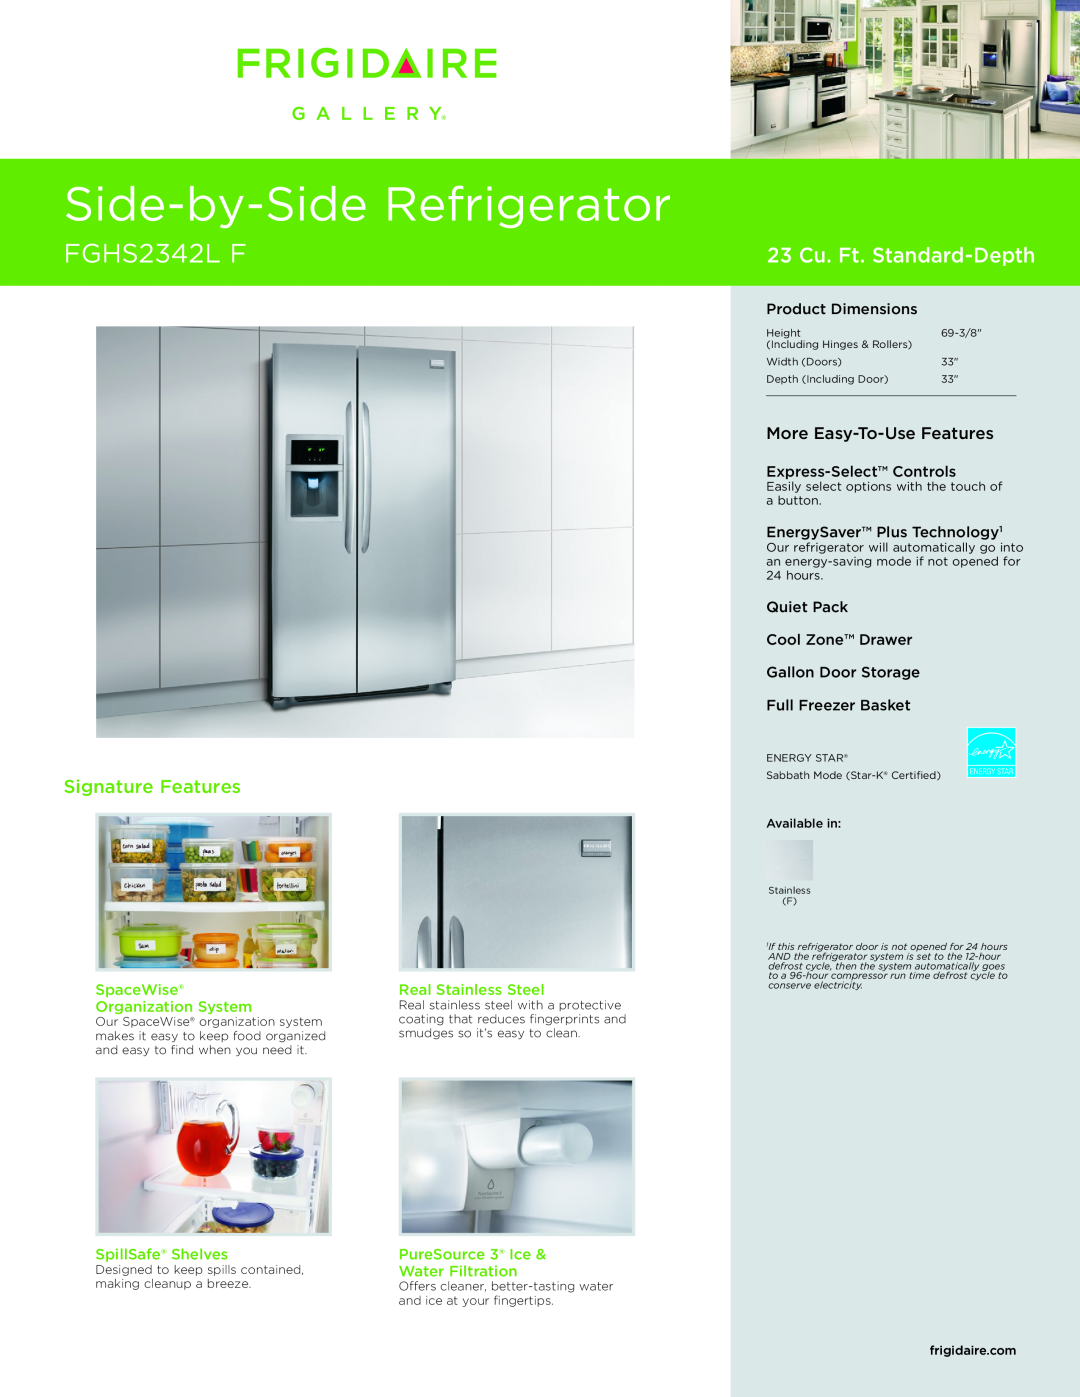 Frigidaire FGHS2342L F dimensions Side-by-SideRefrigerator, 23 Cu. Ft. Standard-Depth, Signature Features, SpaceWise 